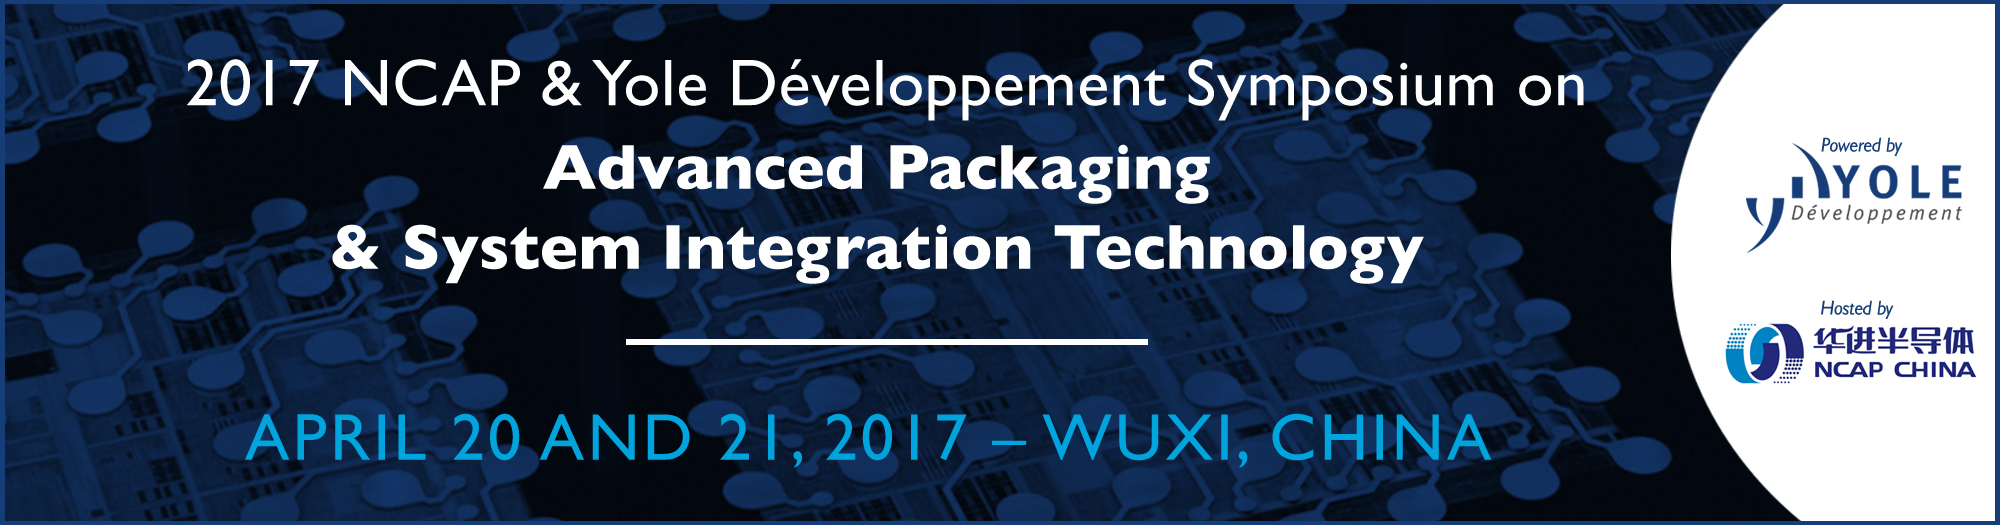 Advanced Packaging Symposium